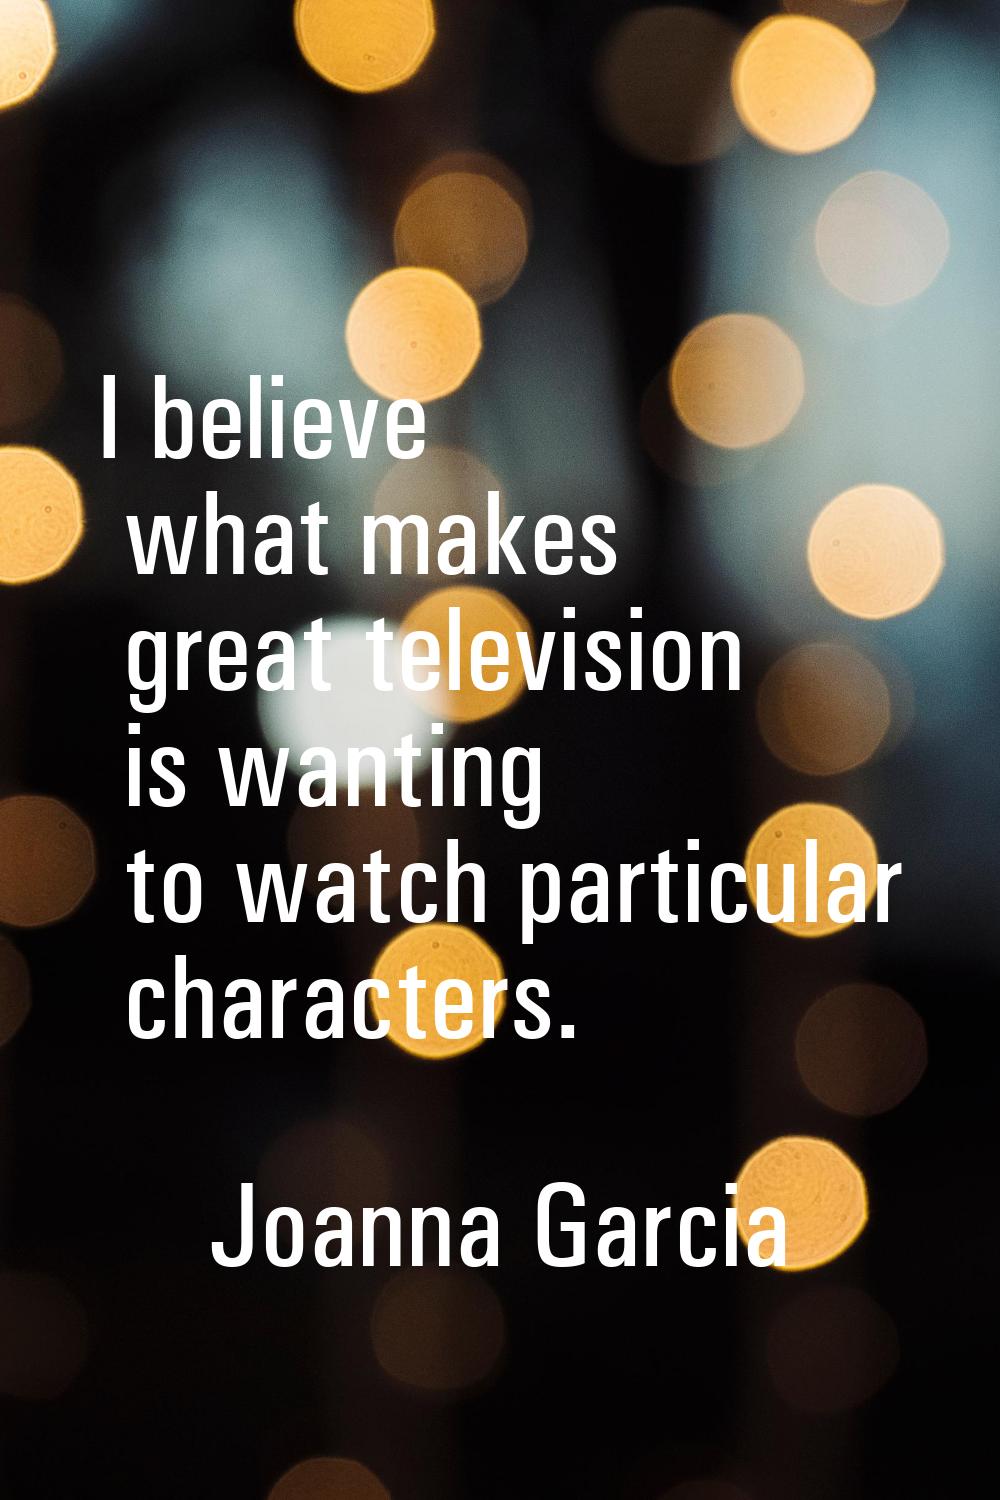 I believe what makes great television is wanting to watch particular characters.